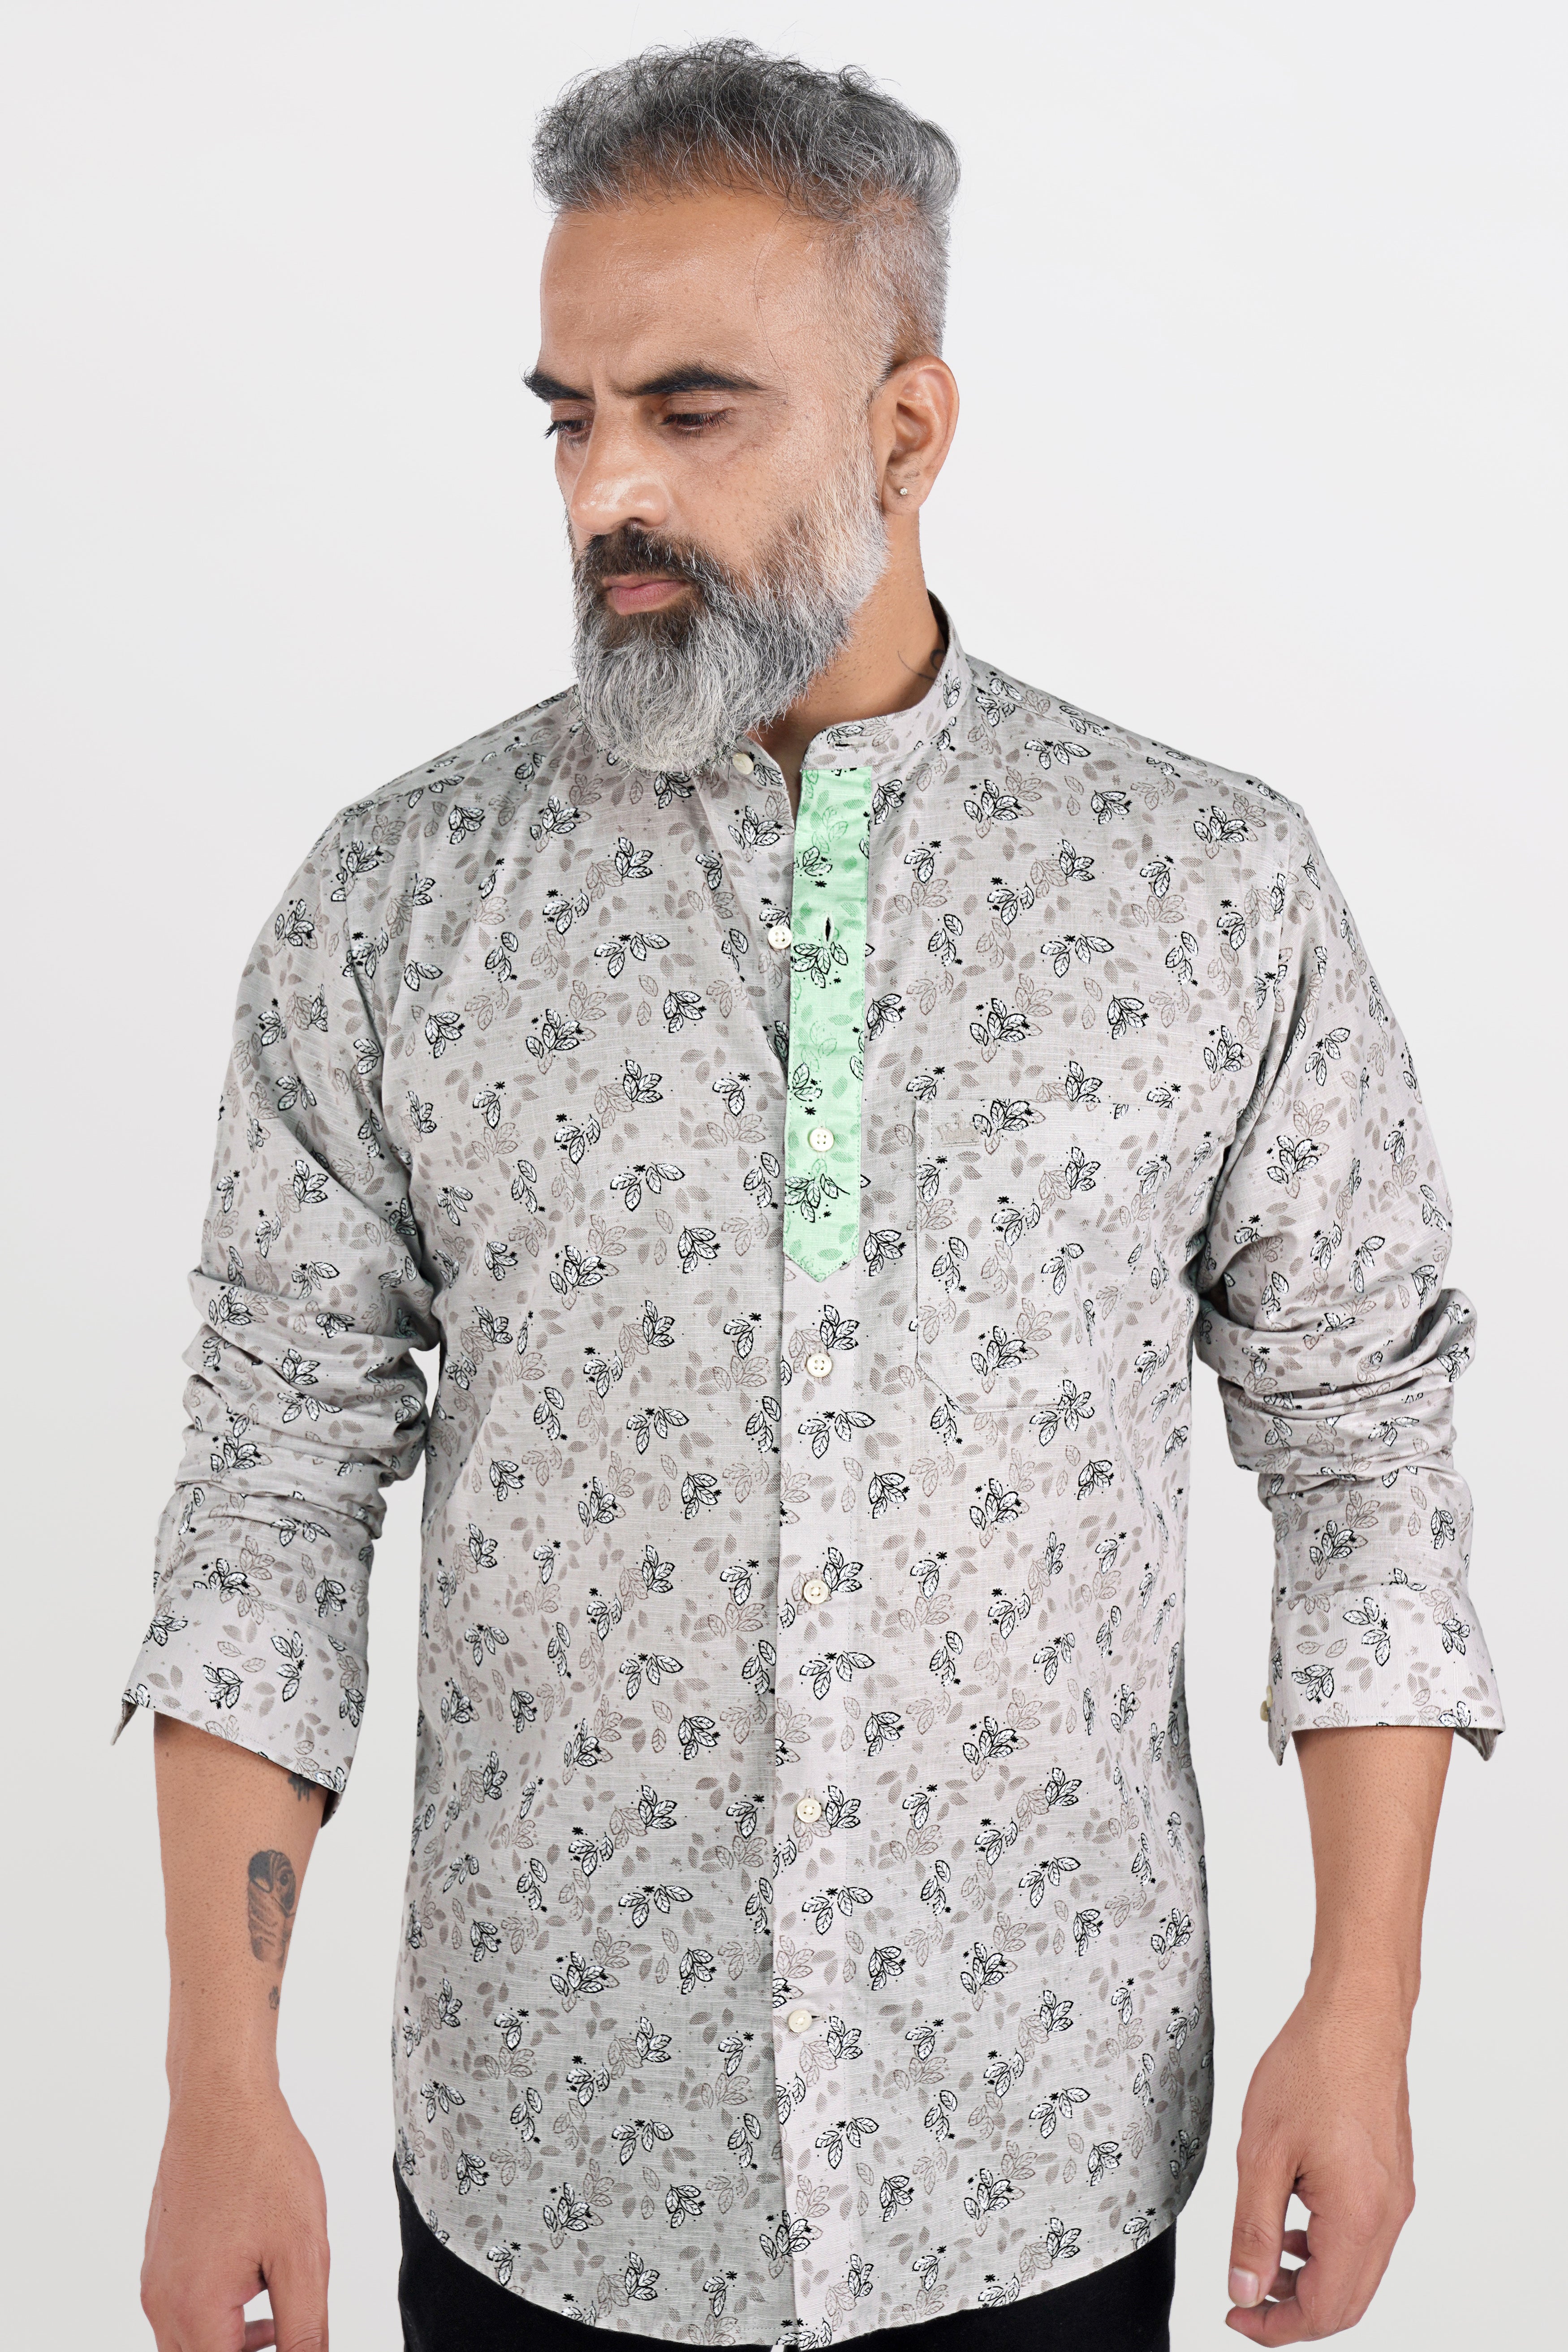 Soft Amber Gray with Thunder Black and Pale Leaf Green Luxurious Linen Designer Shirt